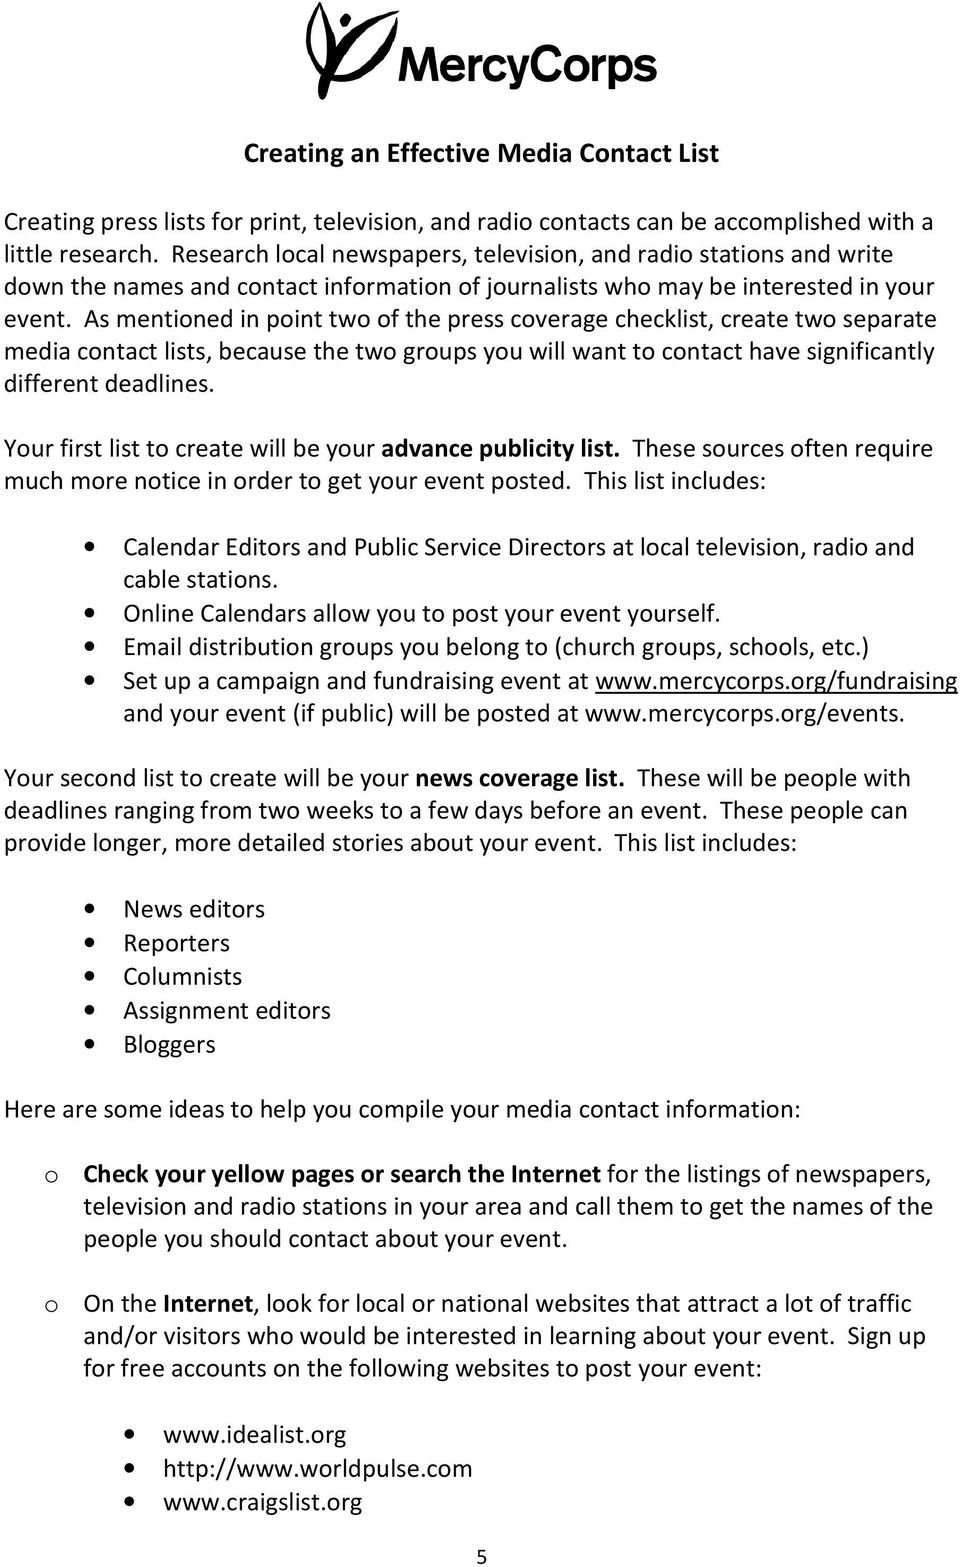 As mentioned in point two of the press coverage checklist, create two separate media contact lists, because the two groups you will want to contact have significantly different deadlines.